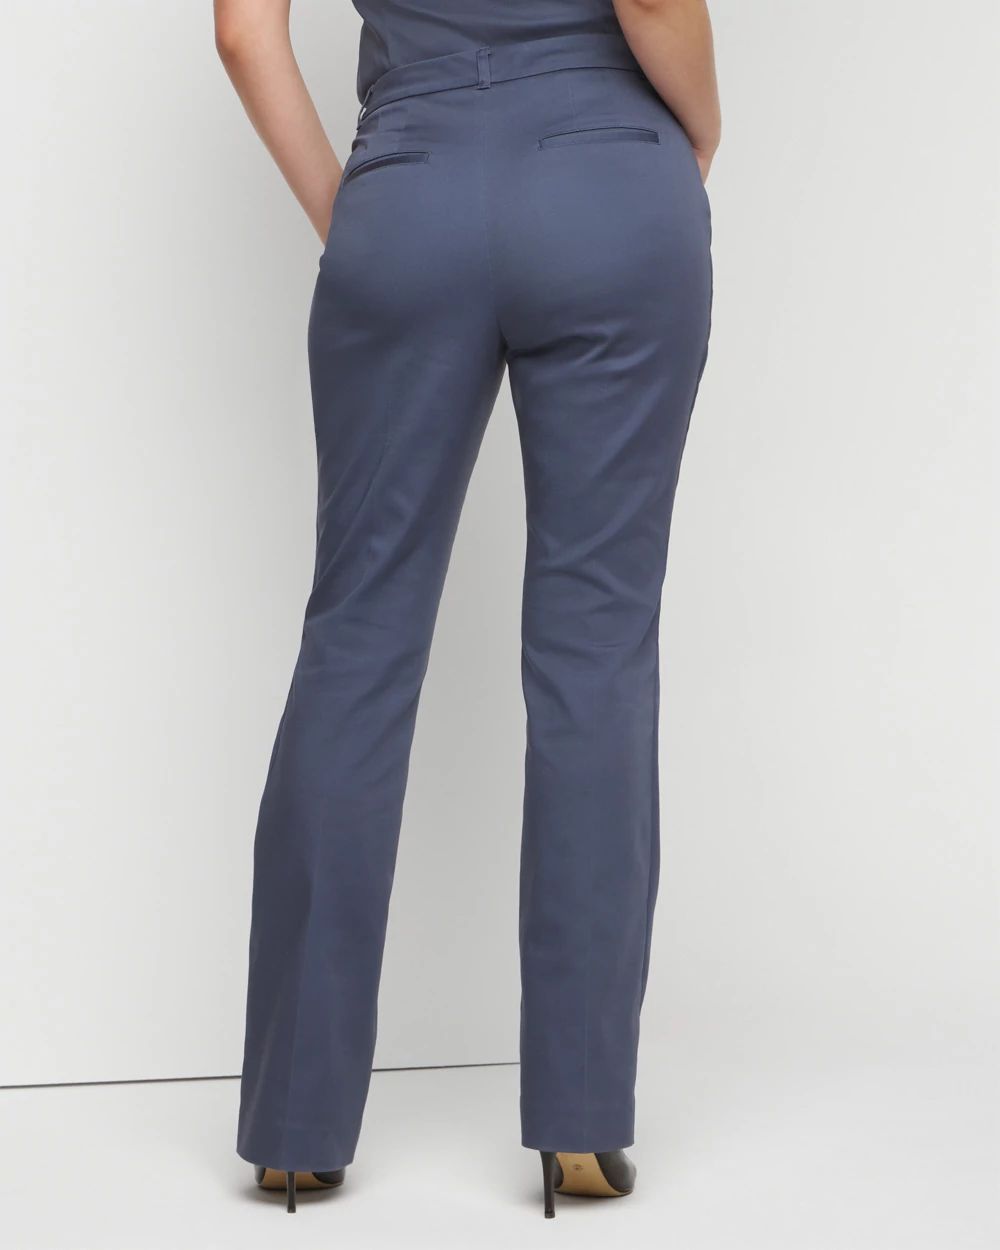 Curvy WHBM® Ines Slim Bootcut Bolina Pant click to view larger image.